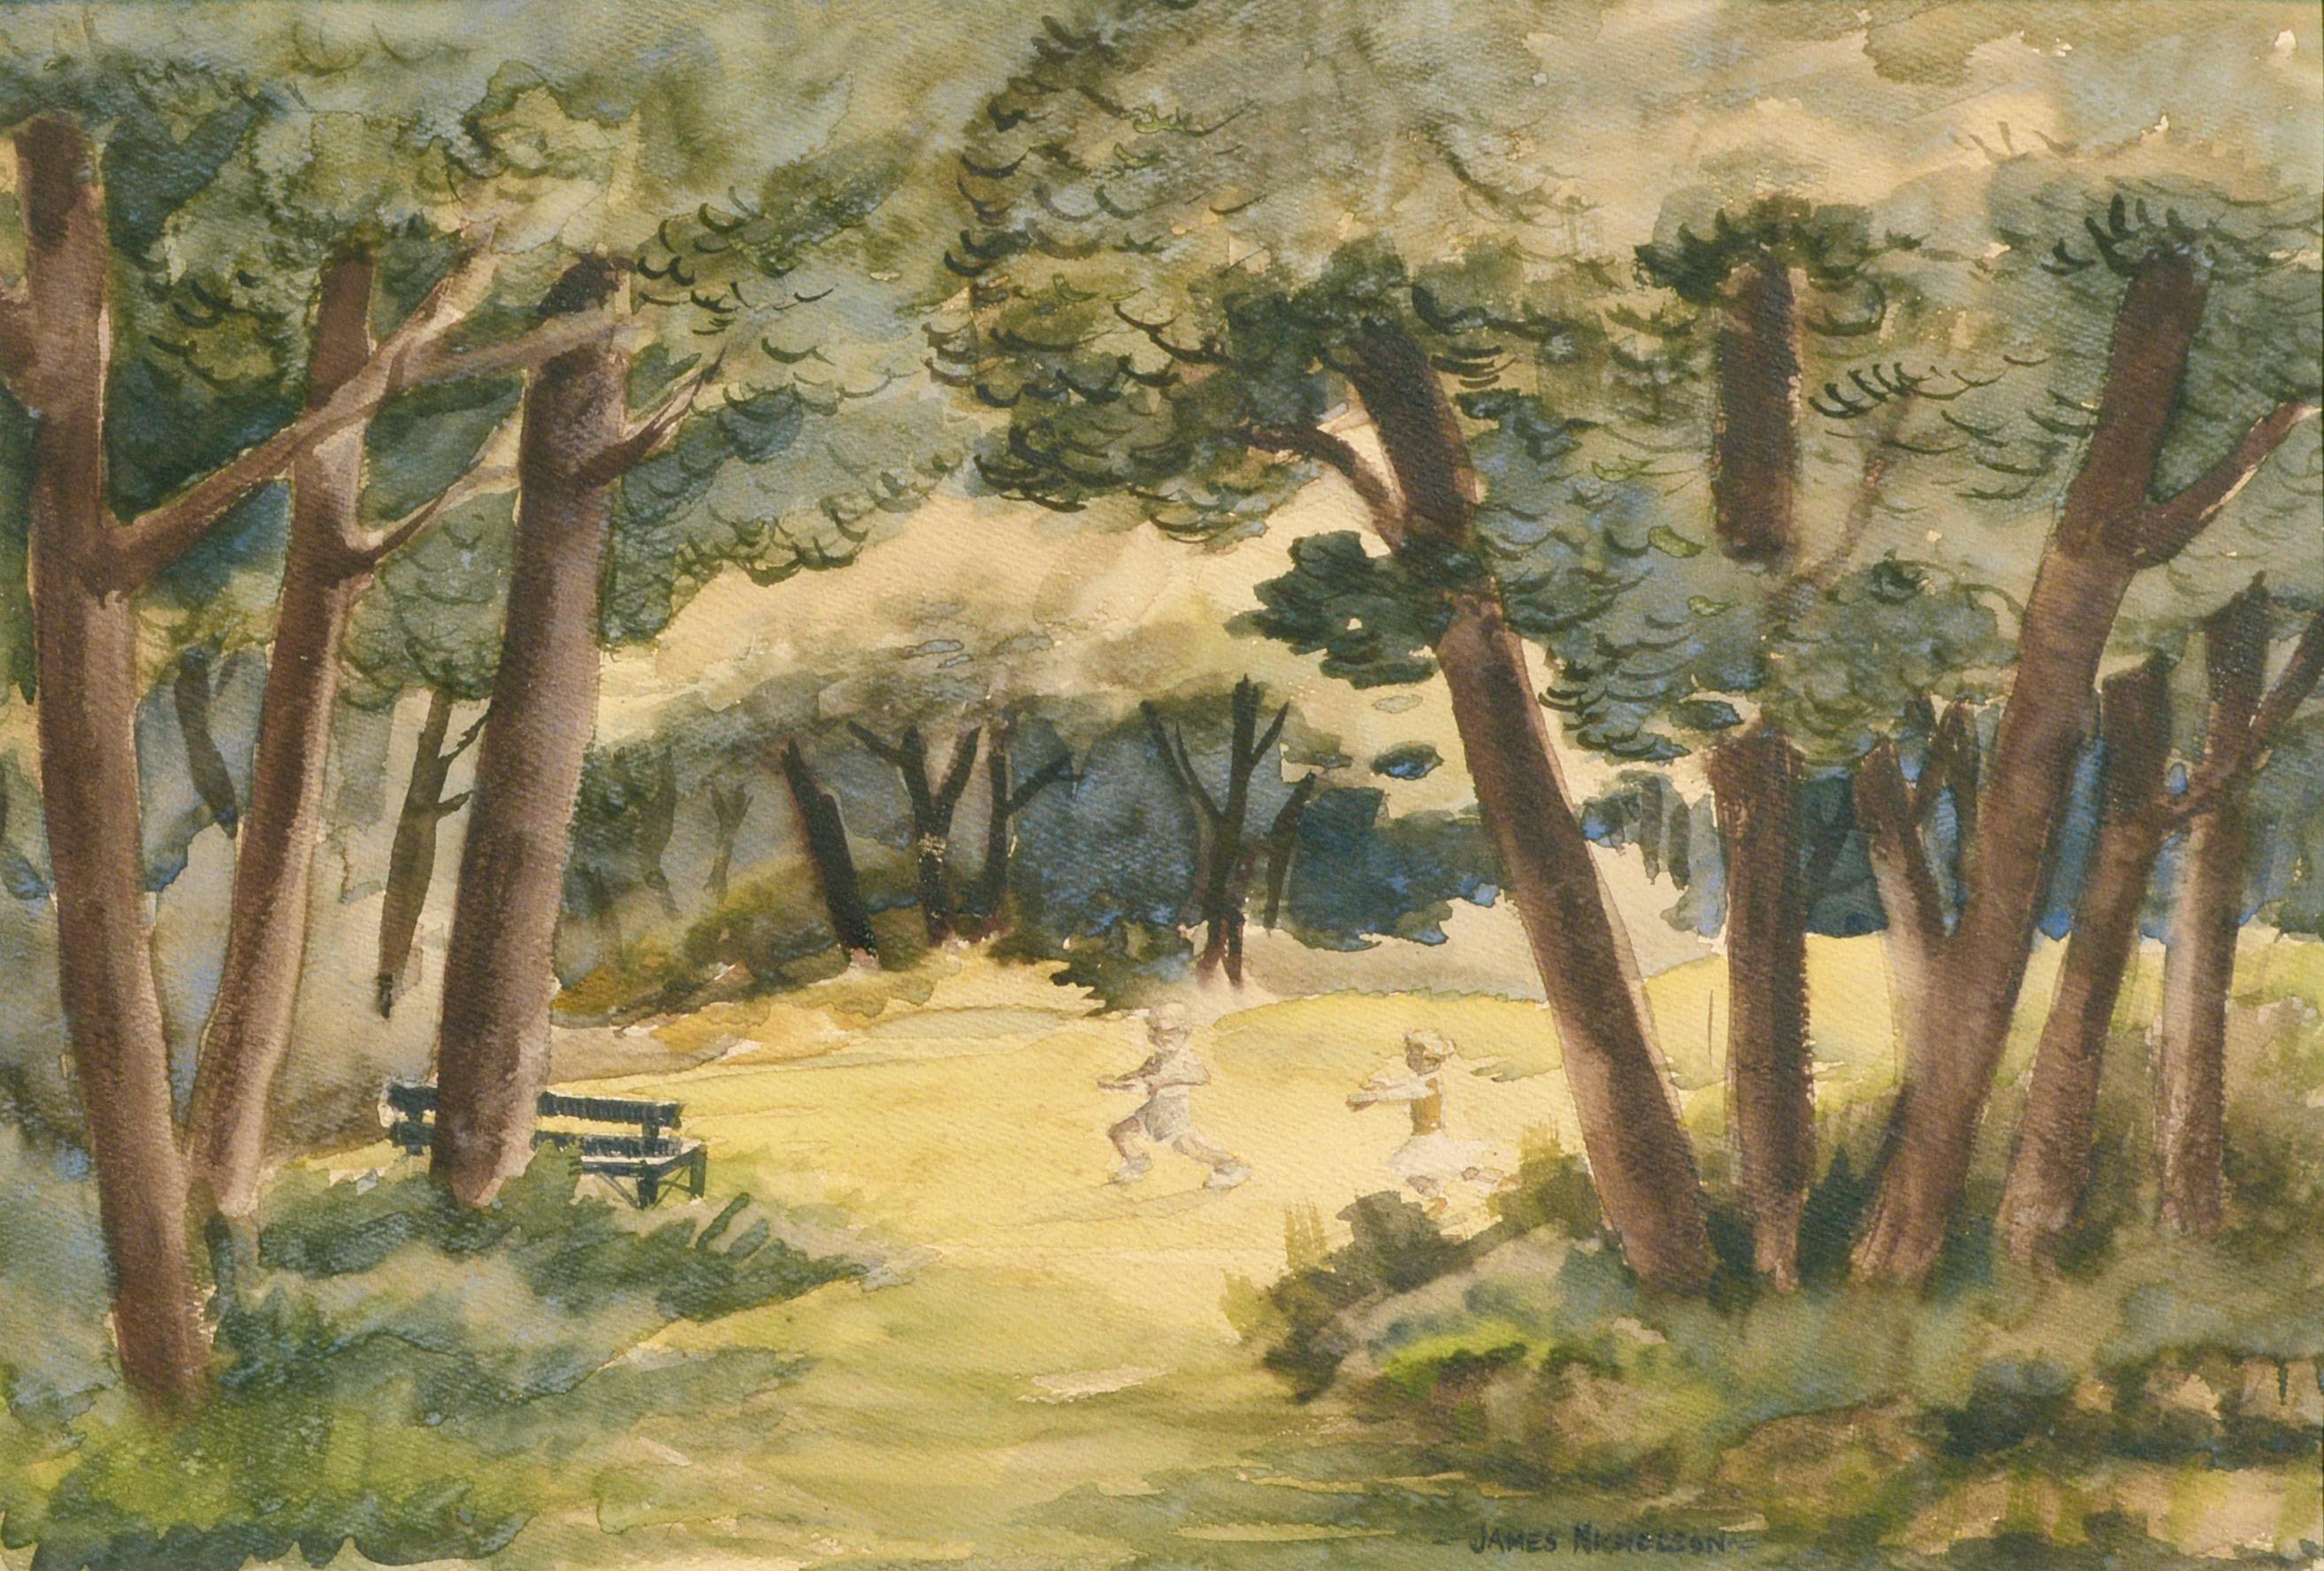 Playing in the Park - Mid Century Figurative Landscape Watercolor  - Art by James Nicholson